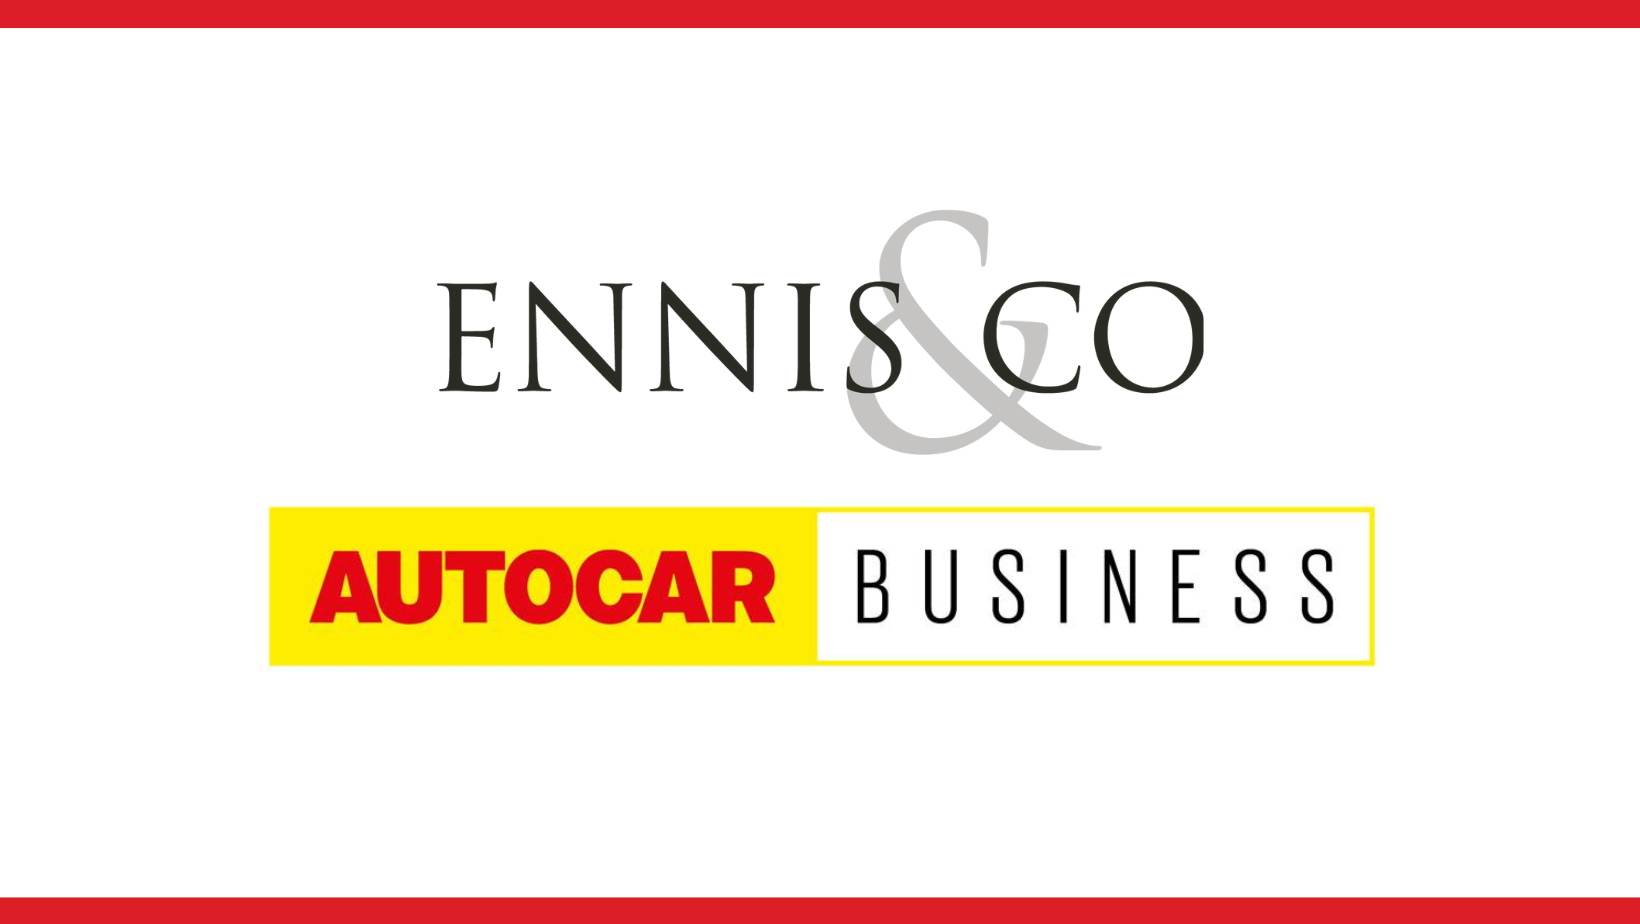 Ennis & Co and Autocar Business logos